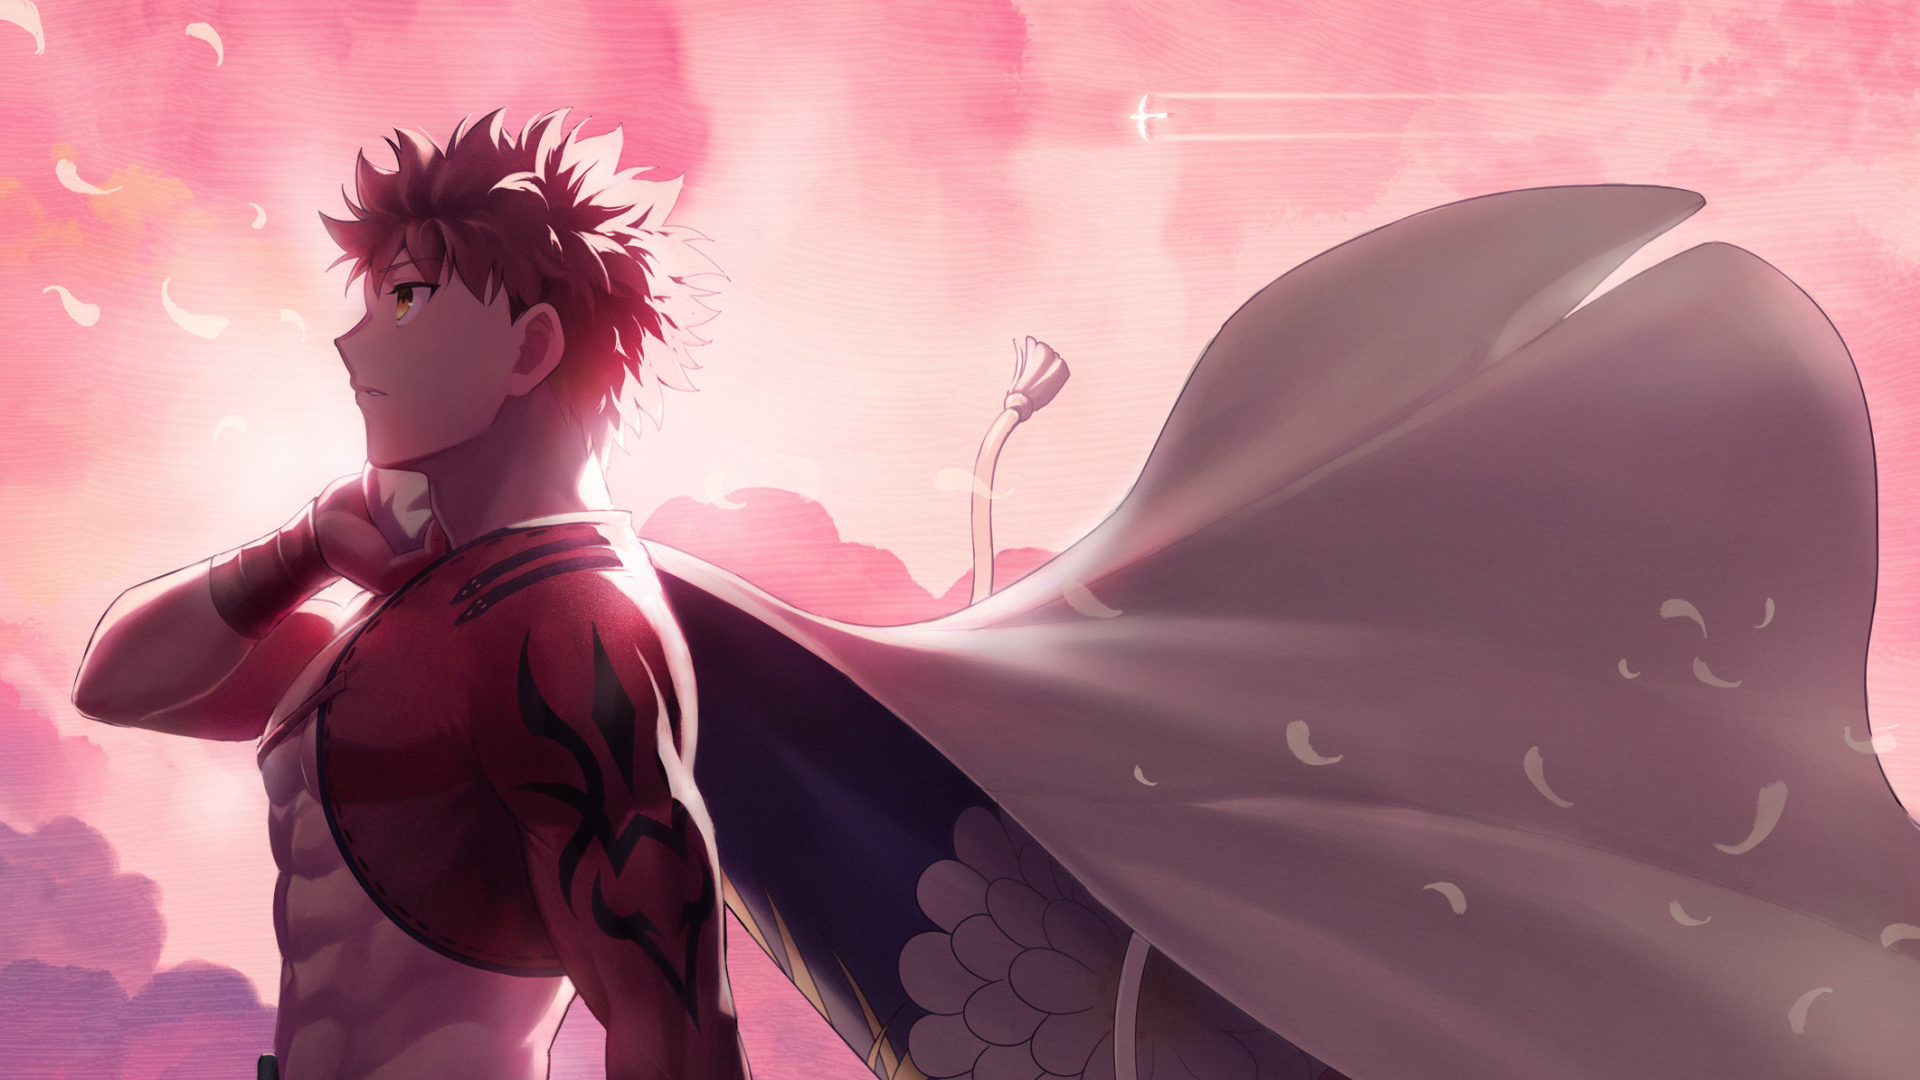 19x1080 Shirou Emiya Hd Fate Grand Order 1080p Laptop Full Hd Wallpaper Hd Anime 4k Wallpapers Images Photos And Background Wallpapers Den